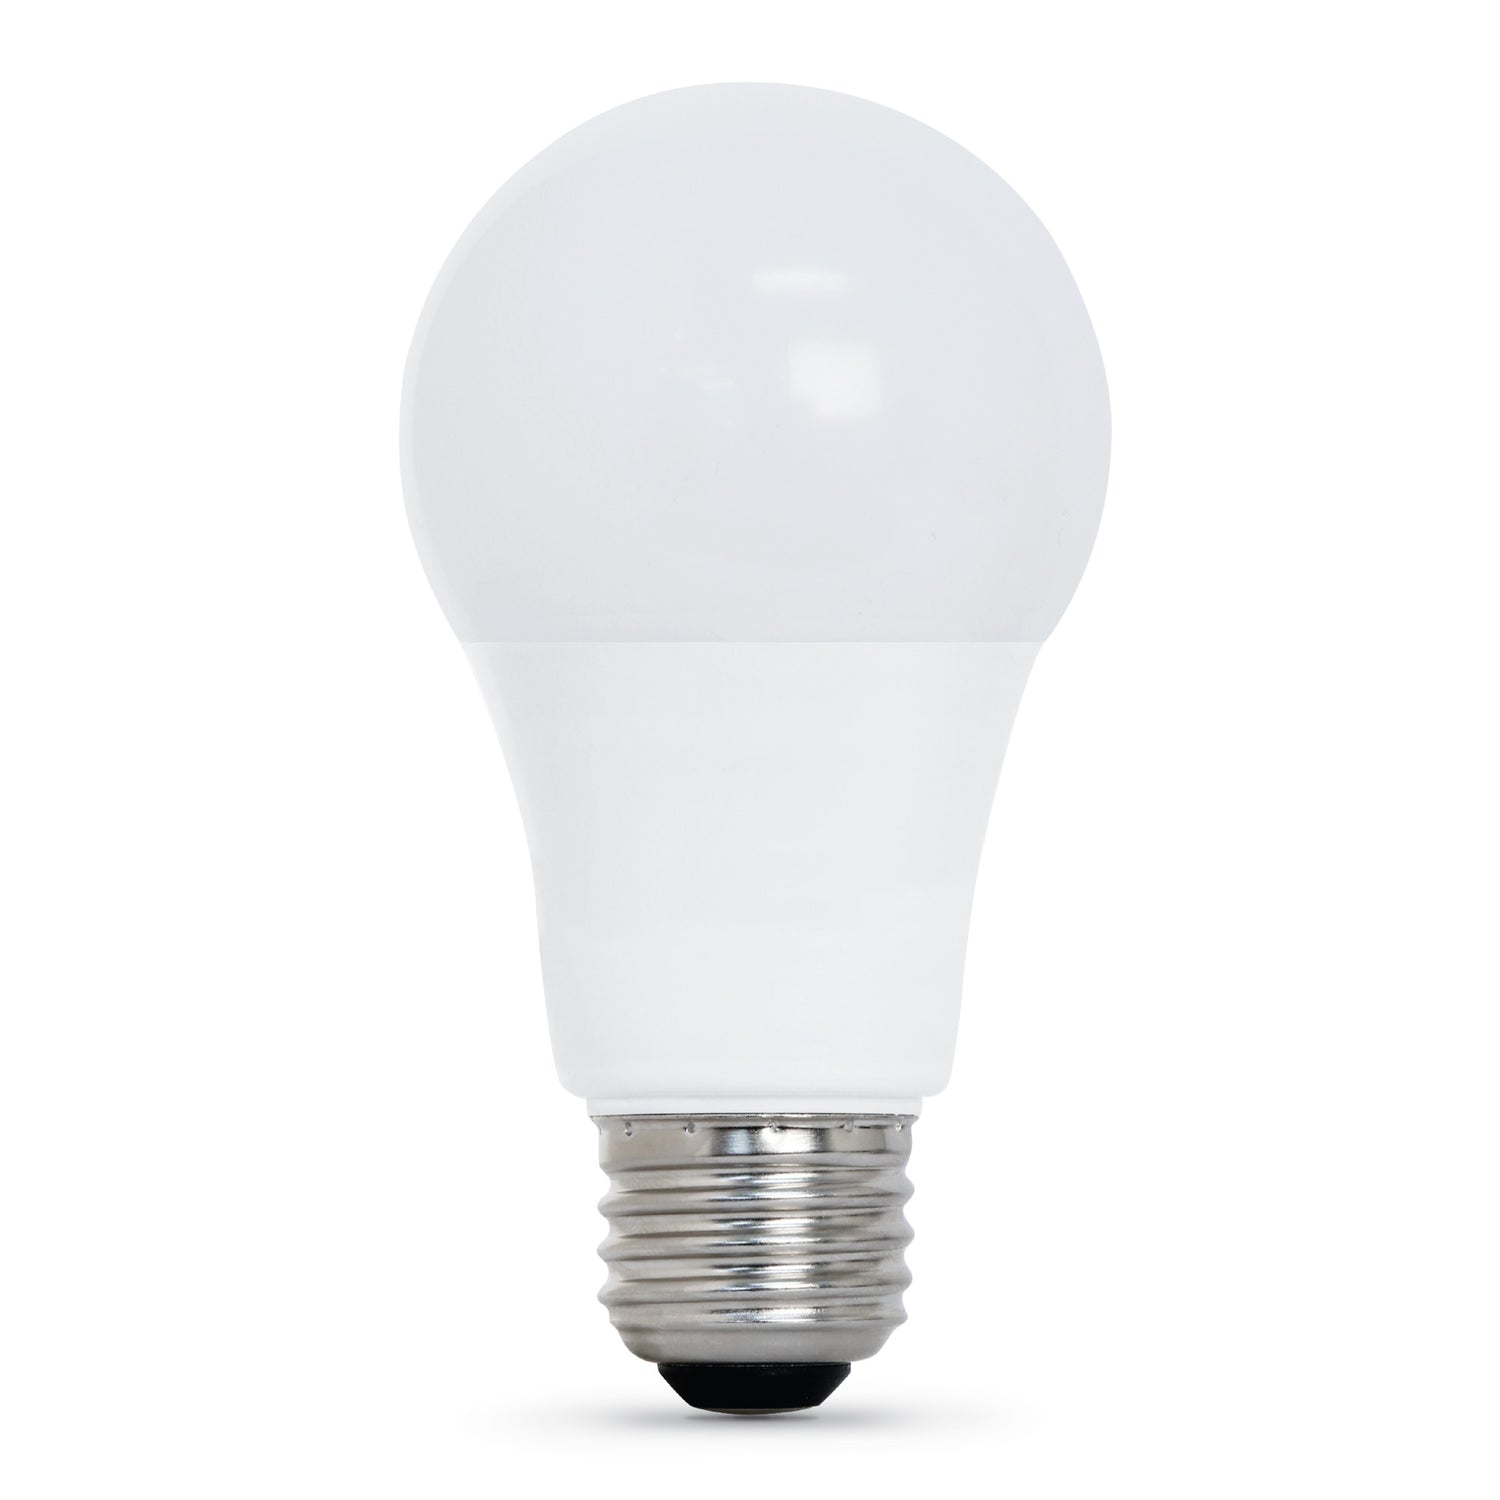 8.8W (60W Replacement) Cool White (4100K) E26 Base Frosted A19 Enhance LED Light Bulb